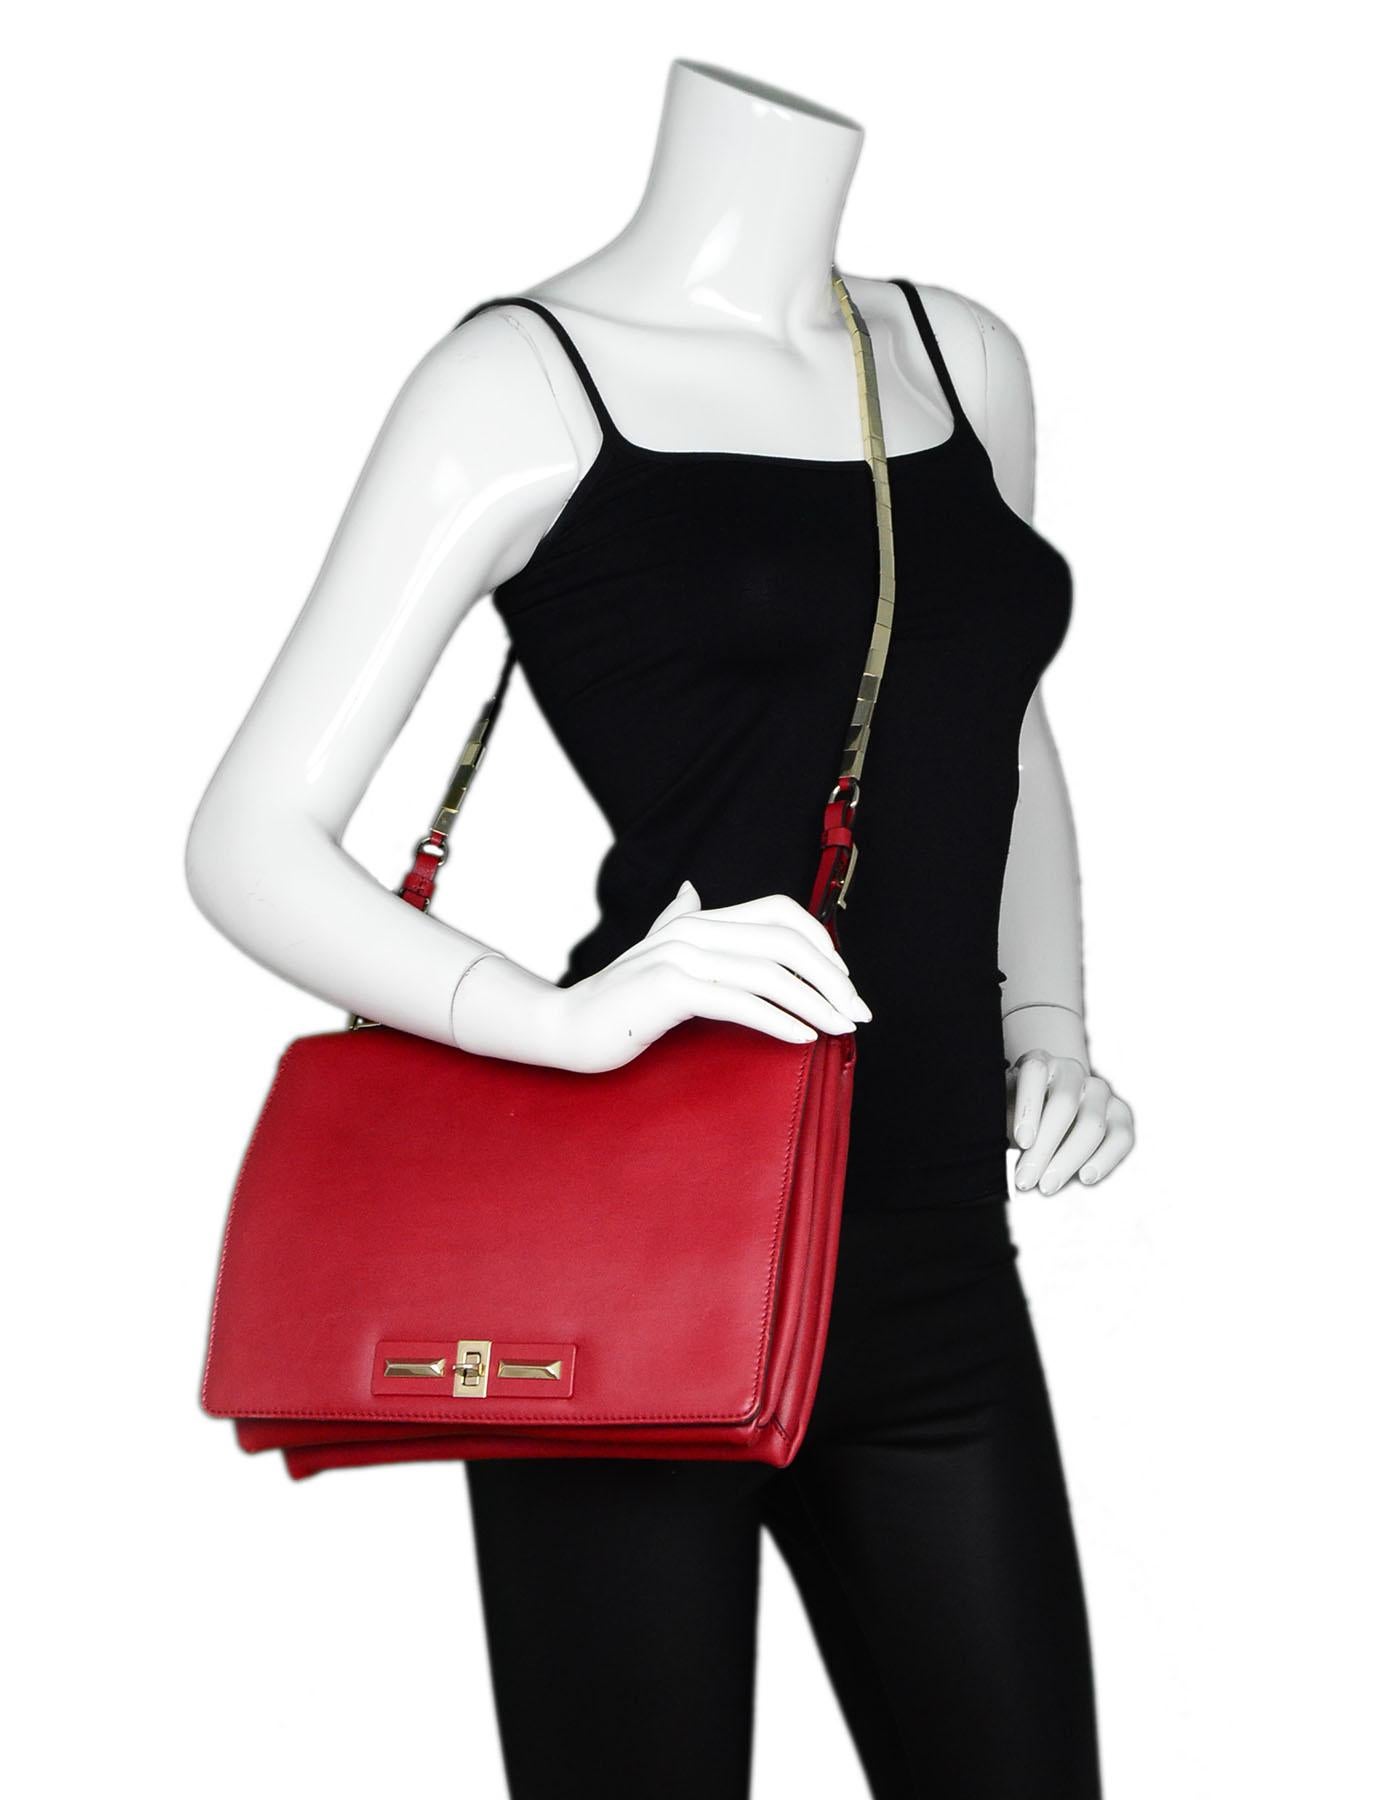 Valentino Red Leather Crossbody Bag

Made In: Italy
Color: Red
Hardware: Goldtone
Materials: Leather, metal
Lining: Beige leather
Closure/Opening: Flap with twist lock closure
Exterior Pockets: None
Interior Pockets: Two compartments - one